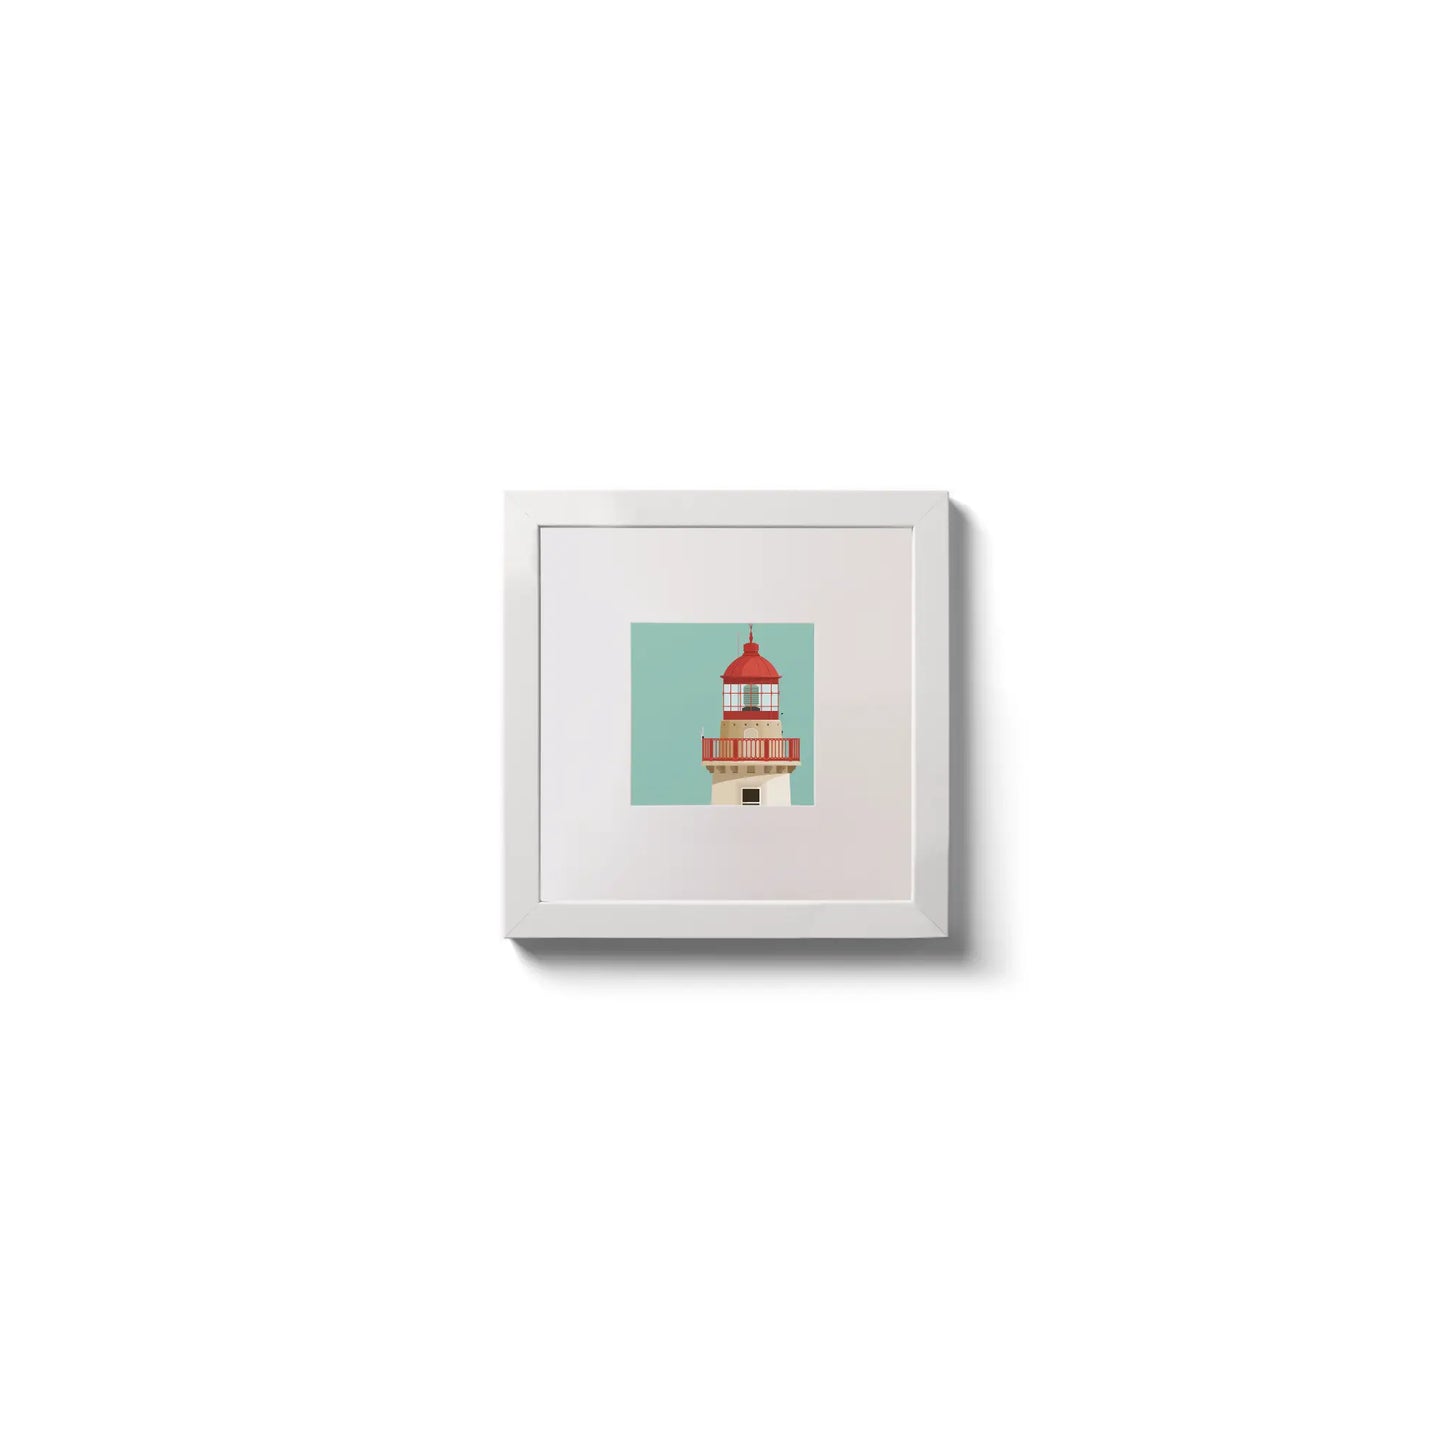 Illustration of Dún Laoghaire East lighthouse on an ocean green background,  in a white square frame measuring 10x10cm.